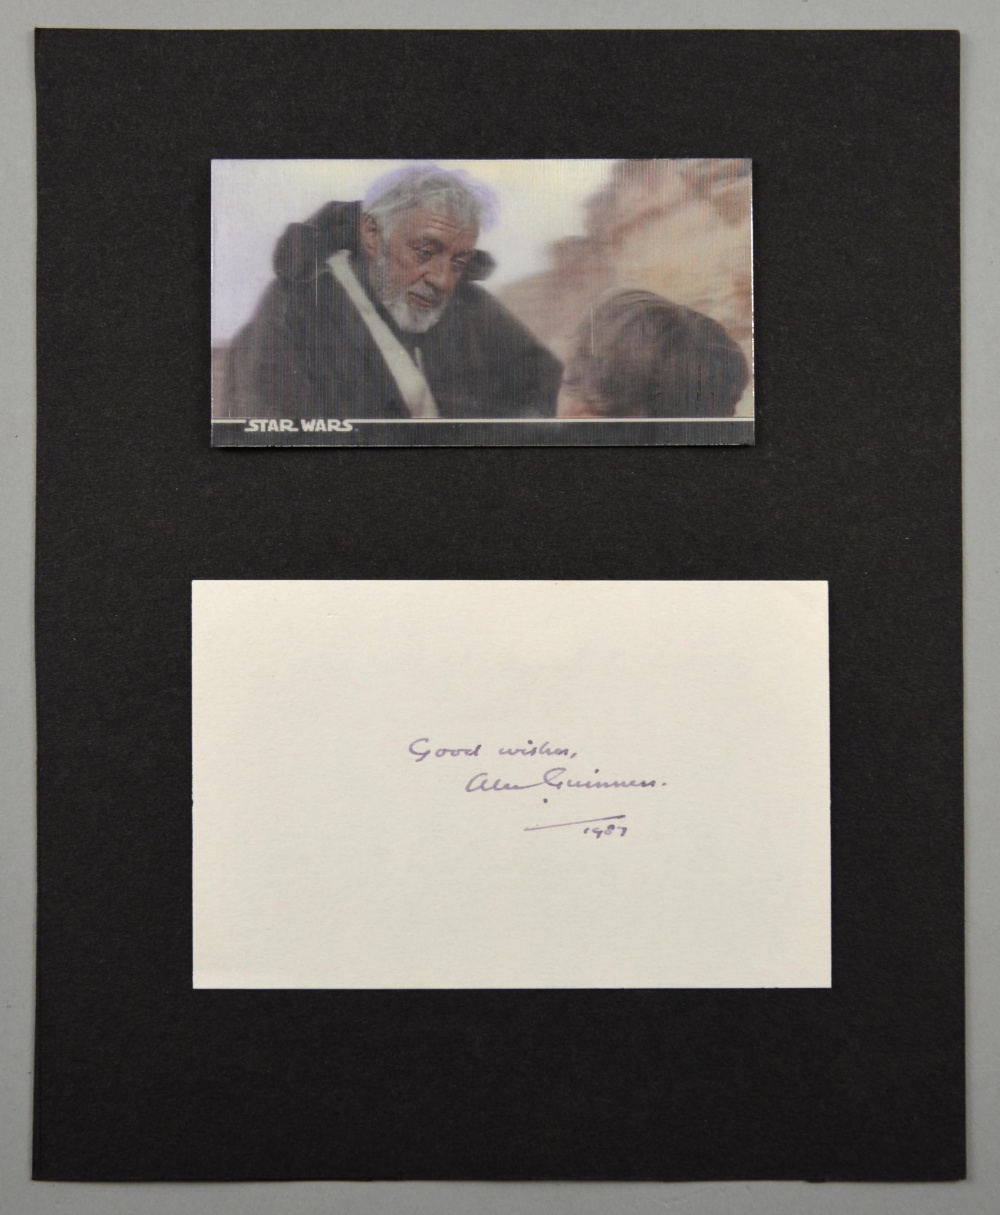 Revised Estimate - Alec Guinness, Autograph card signed by the Star Wars actor, dated 1987 along